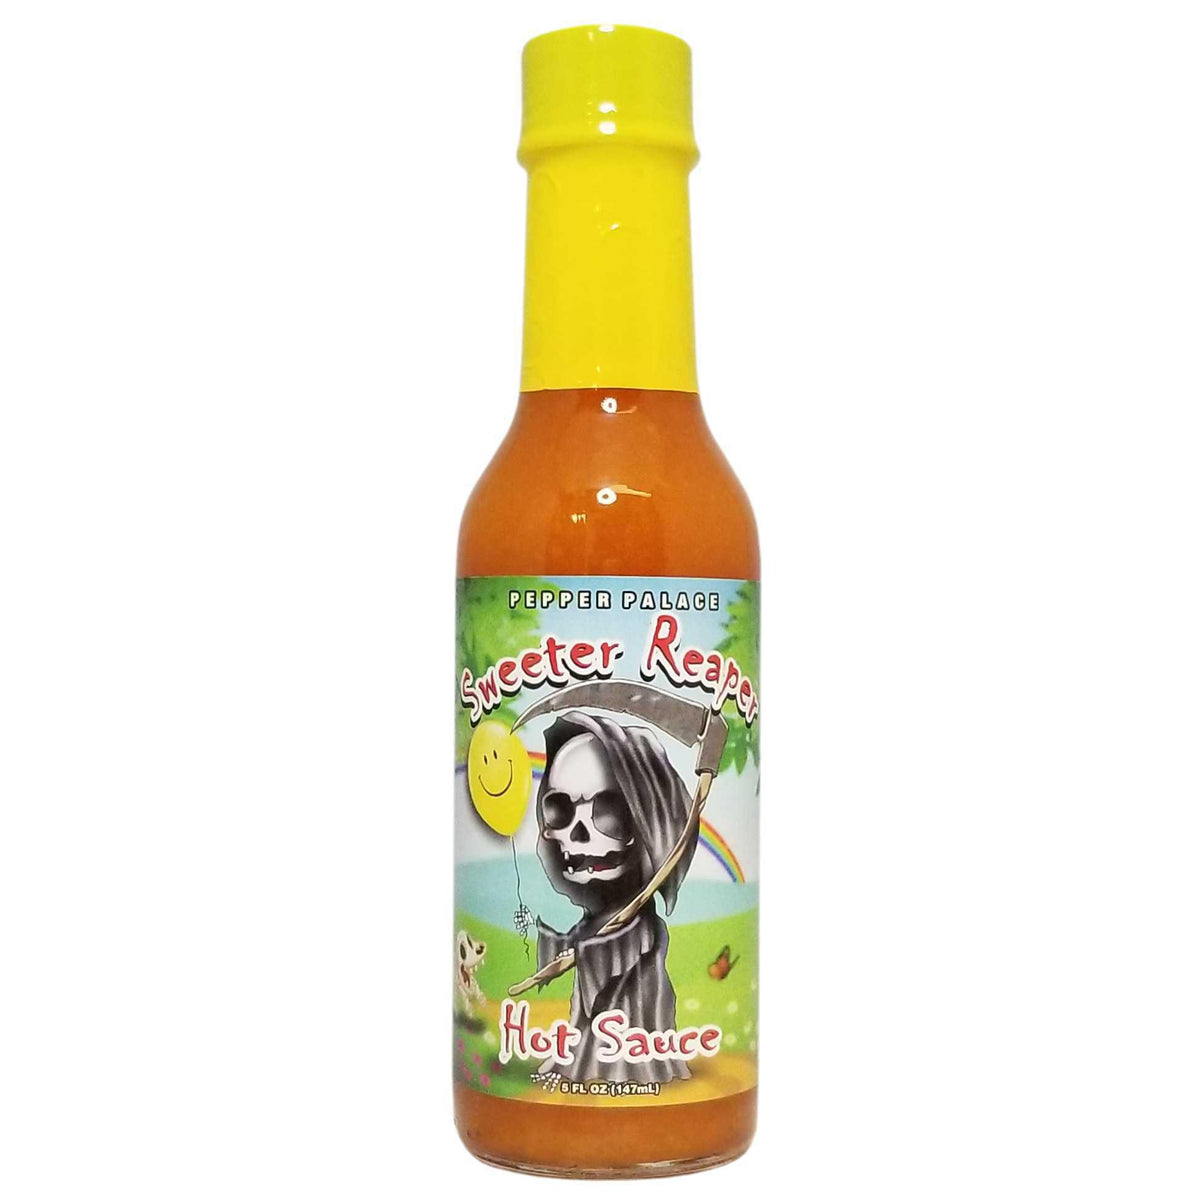 East Coast Box, Maritime Madness Hot Sauce, 4 x 275ml Squeeze Bottles,  Vegan, Dairy Free, Gluten Free, Low Sodium, Made in Canada : Amazon.ca:  Grocery & Gourmet Food